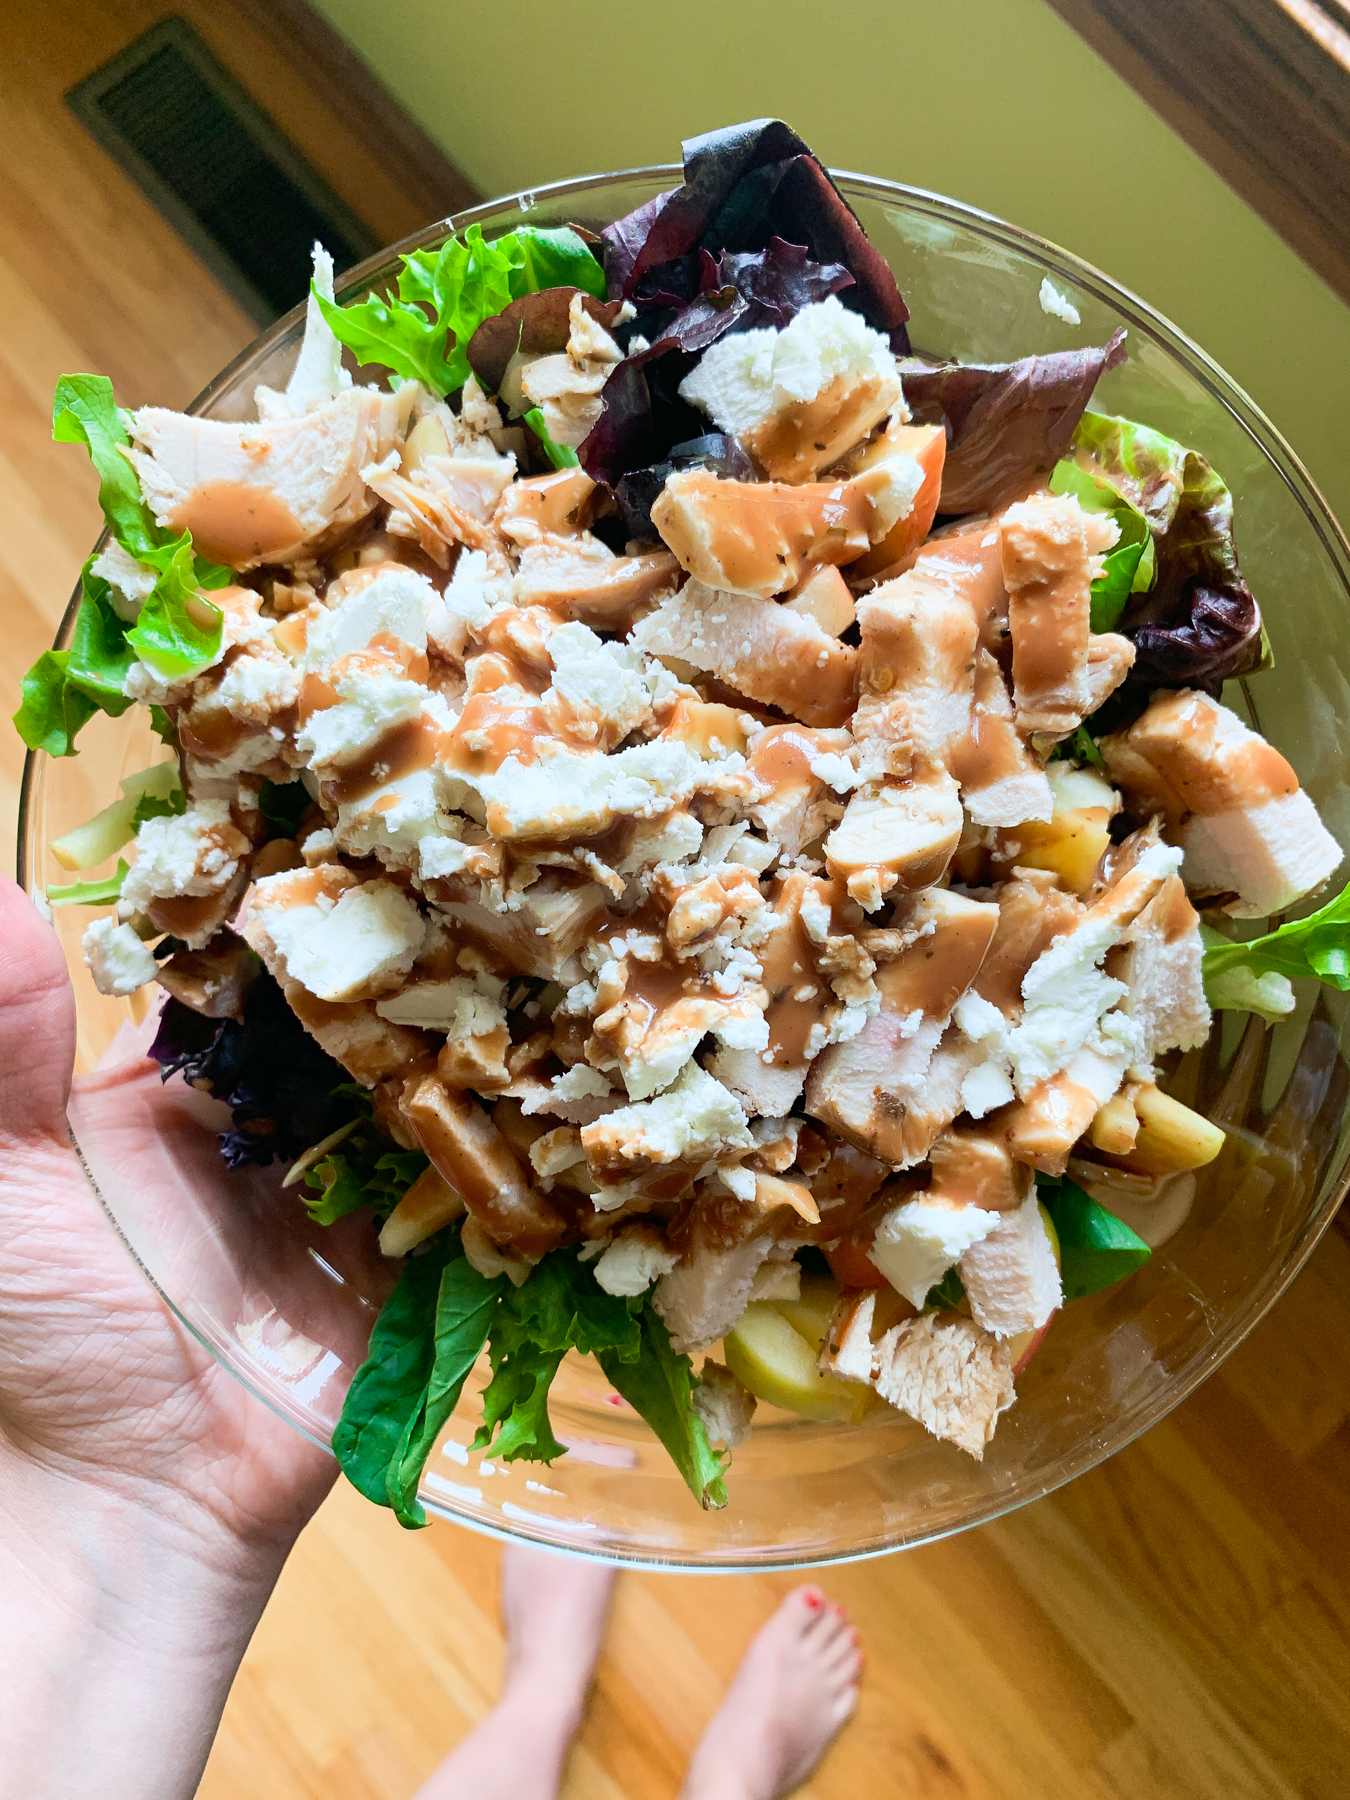 mixed green salad with apples, goat cheese, almonds, chicken, and balsamic